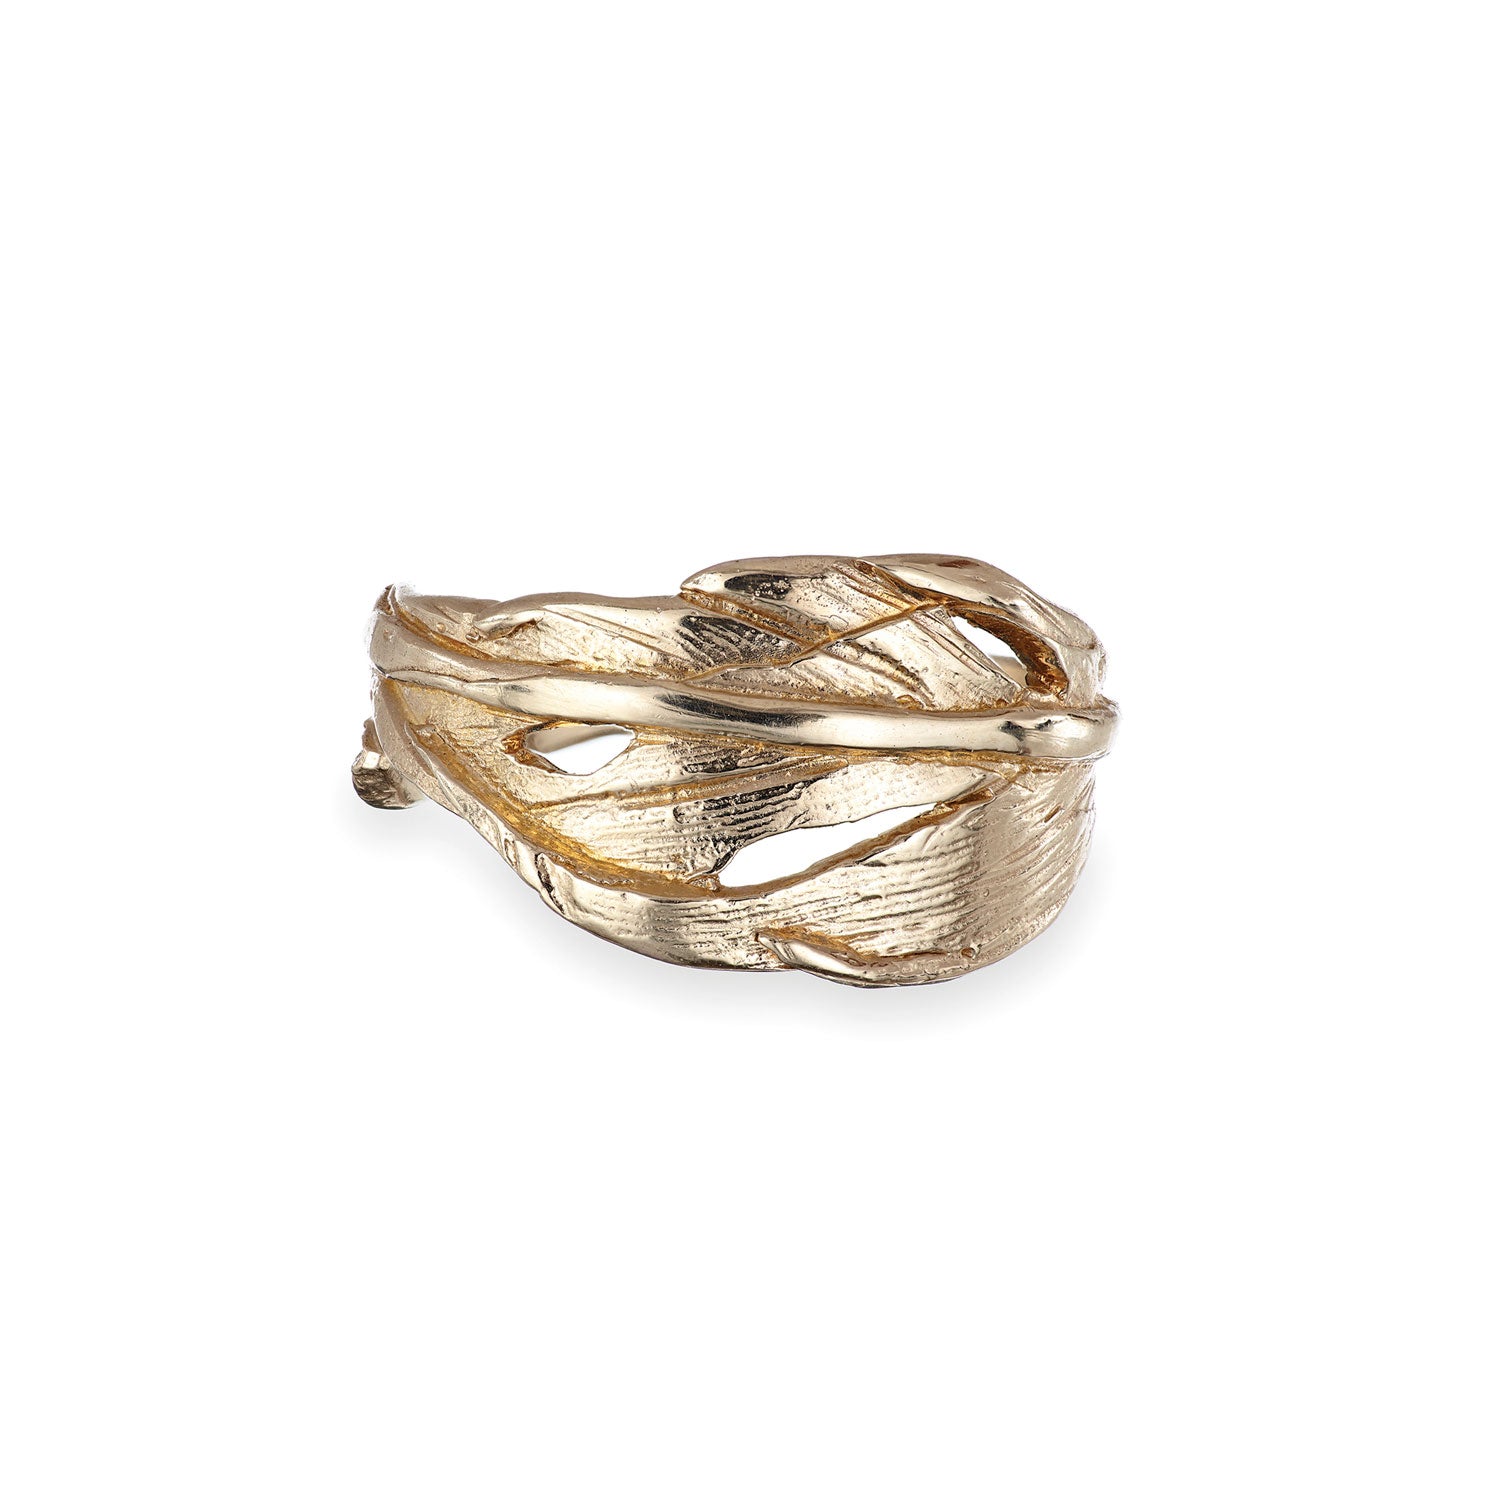 This Twig Bangle Sterling Silver Bracelet – How Fine Designs